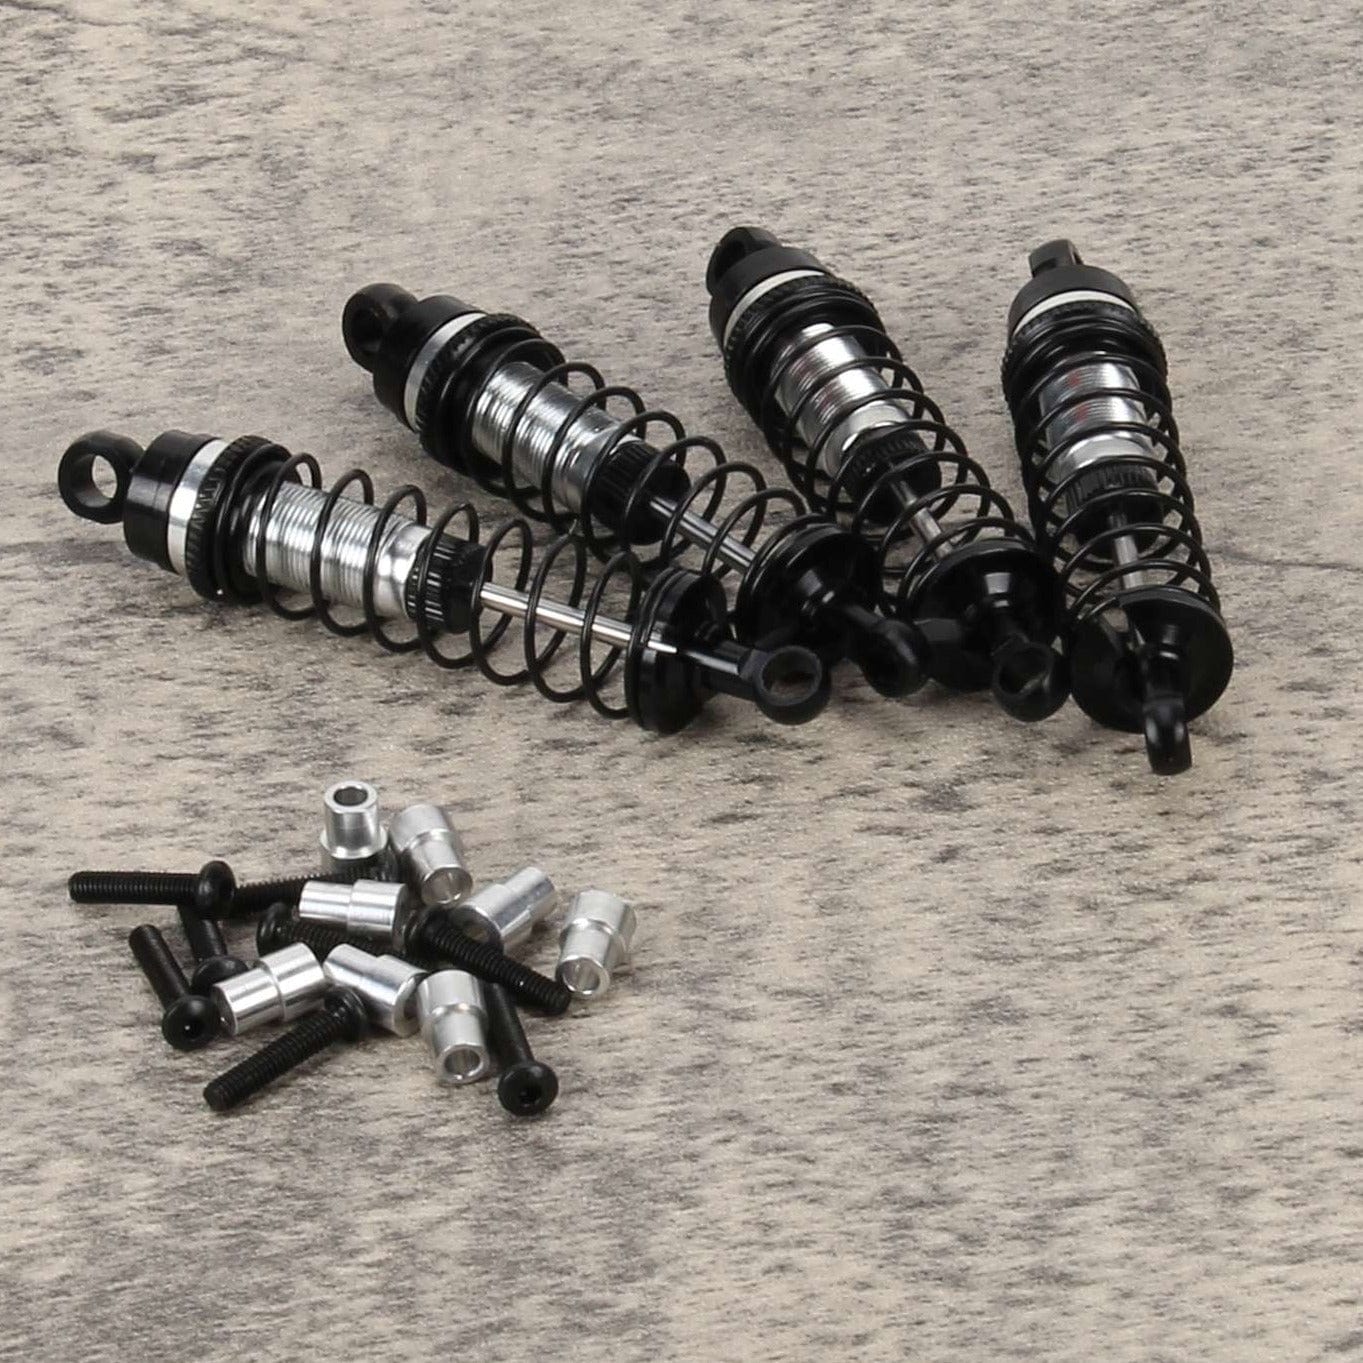 RCAWD Traxxas Latrax Black / Two Set RCAWD Oil-filled Assembled with Springs Shocks 2pcs for 1/18 Traxxas Latrax Upgrades